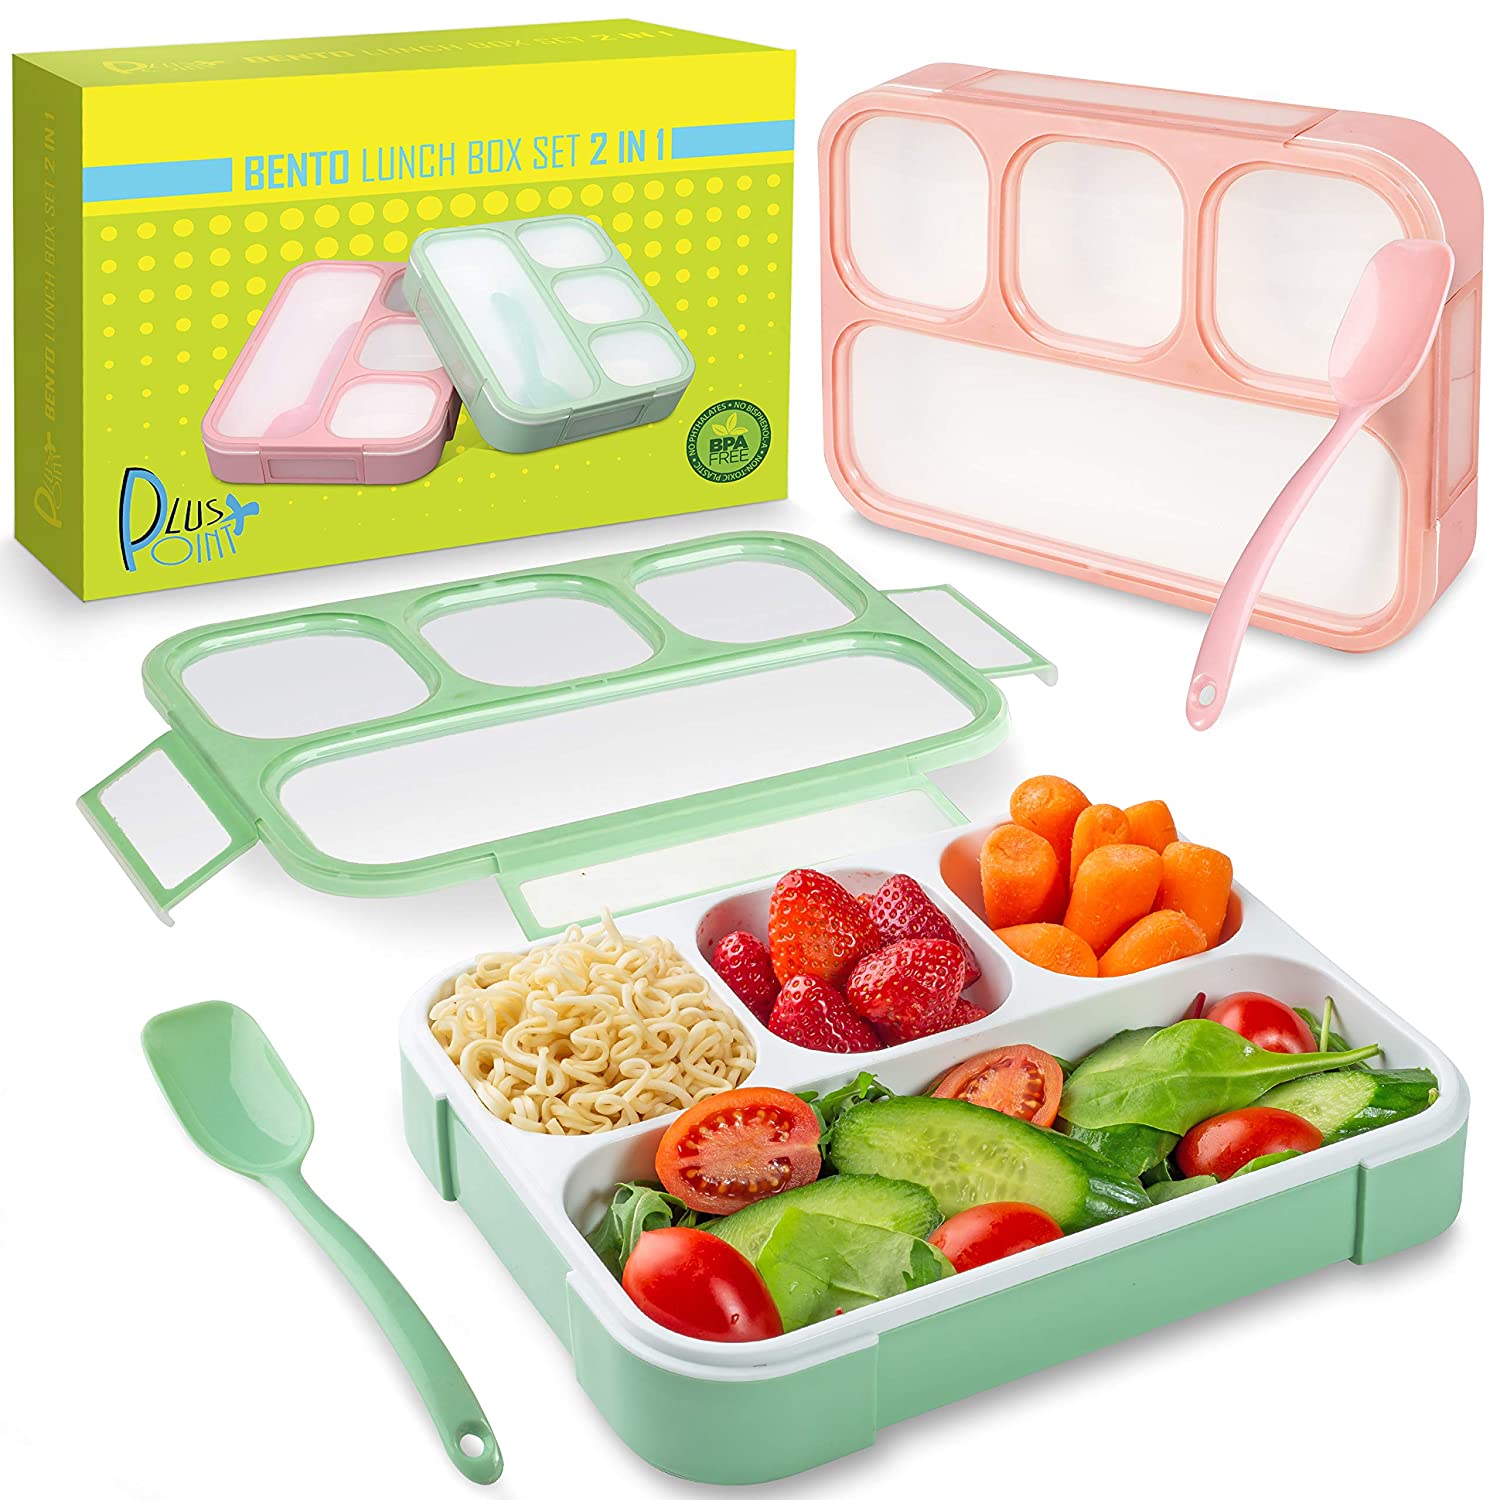 Bento Lunch Box Container For Kids and adults